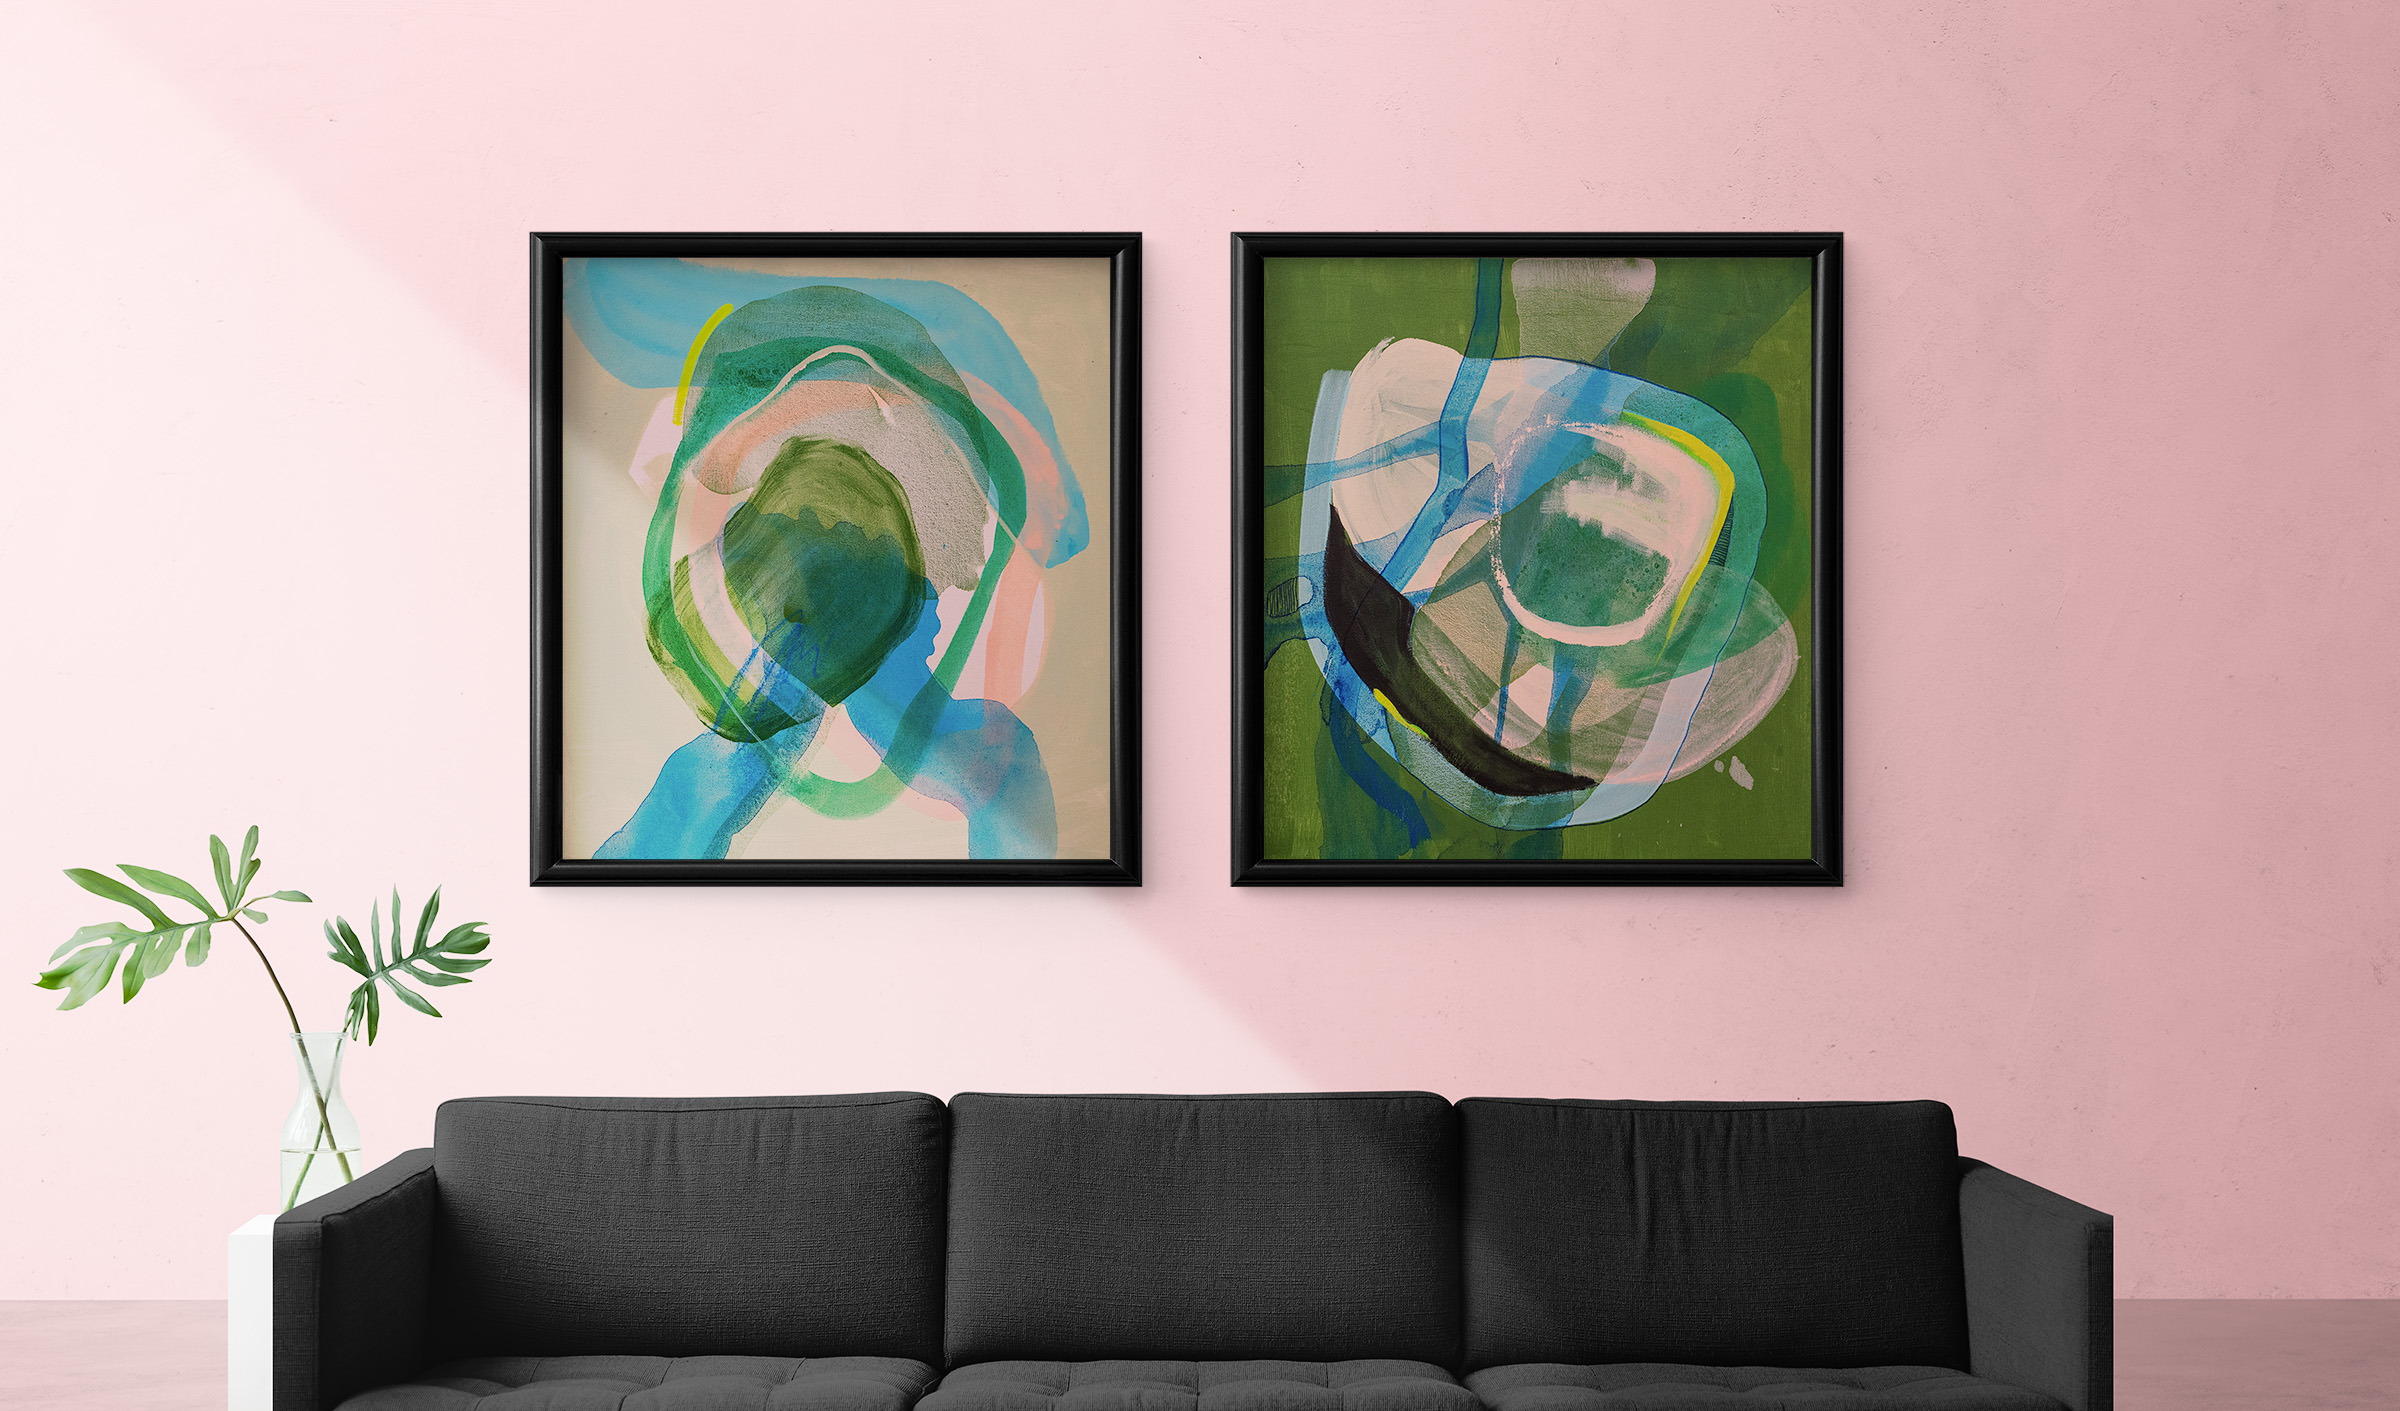 Limited Edition Hotel Art / Original Artwork for Hotels / Abstract Hotel Paintings